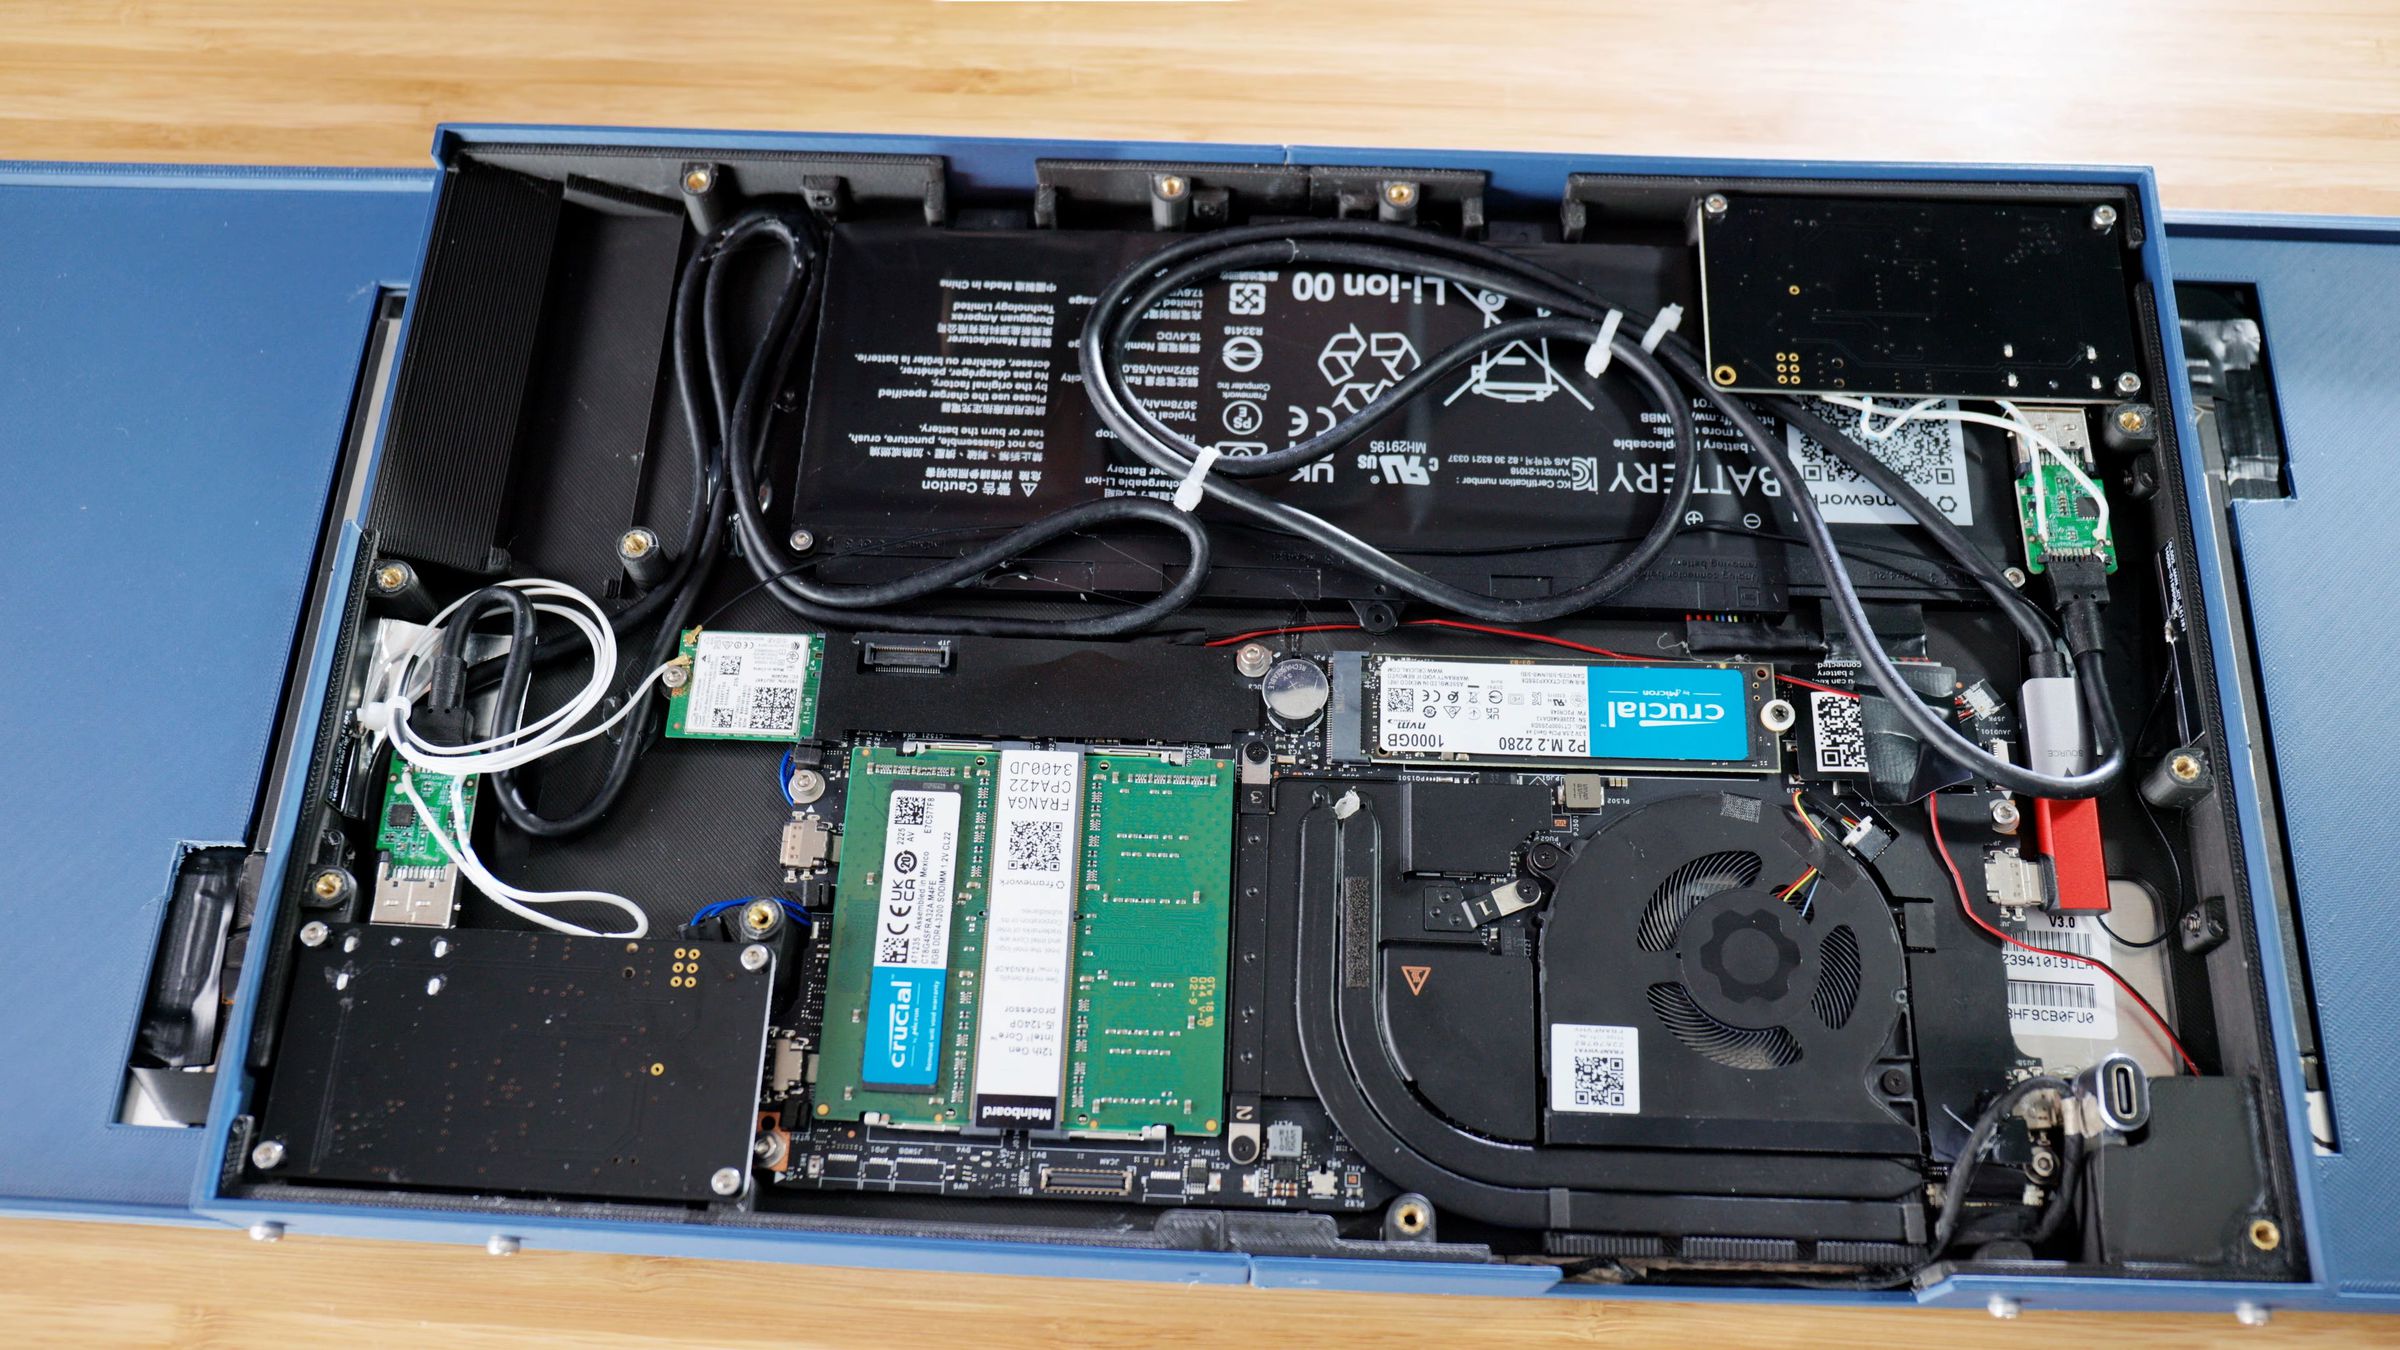 An image of the inner workings of the build of the laptop.